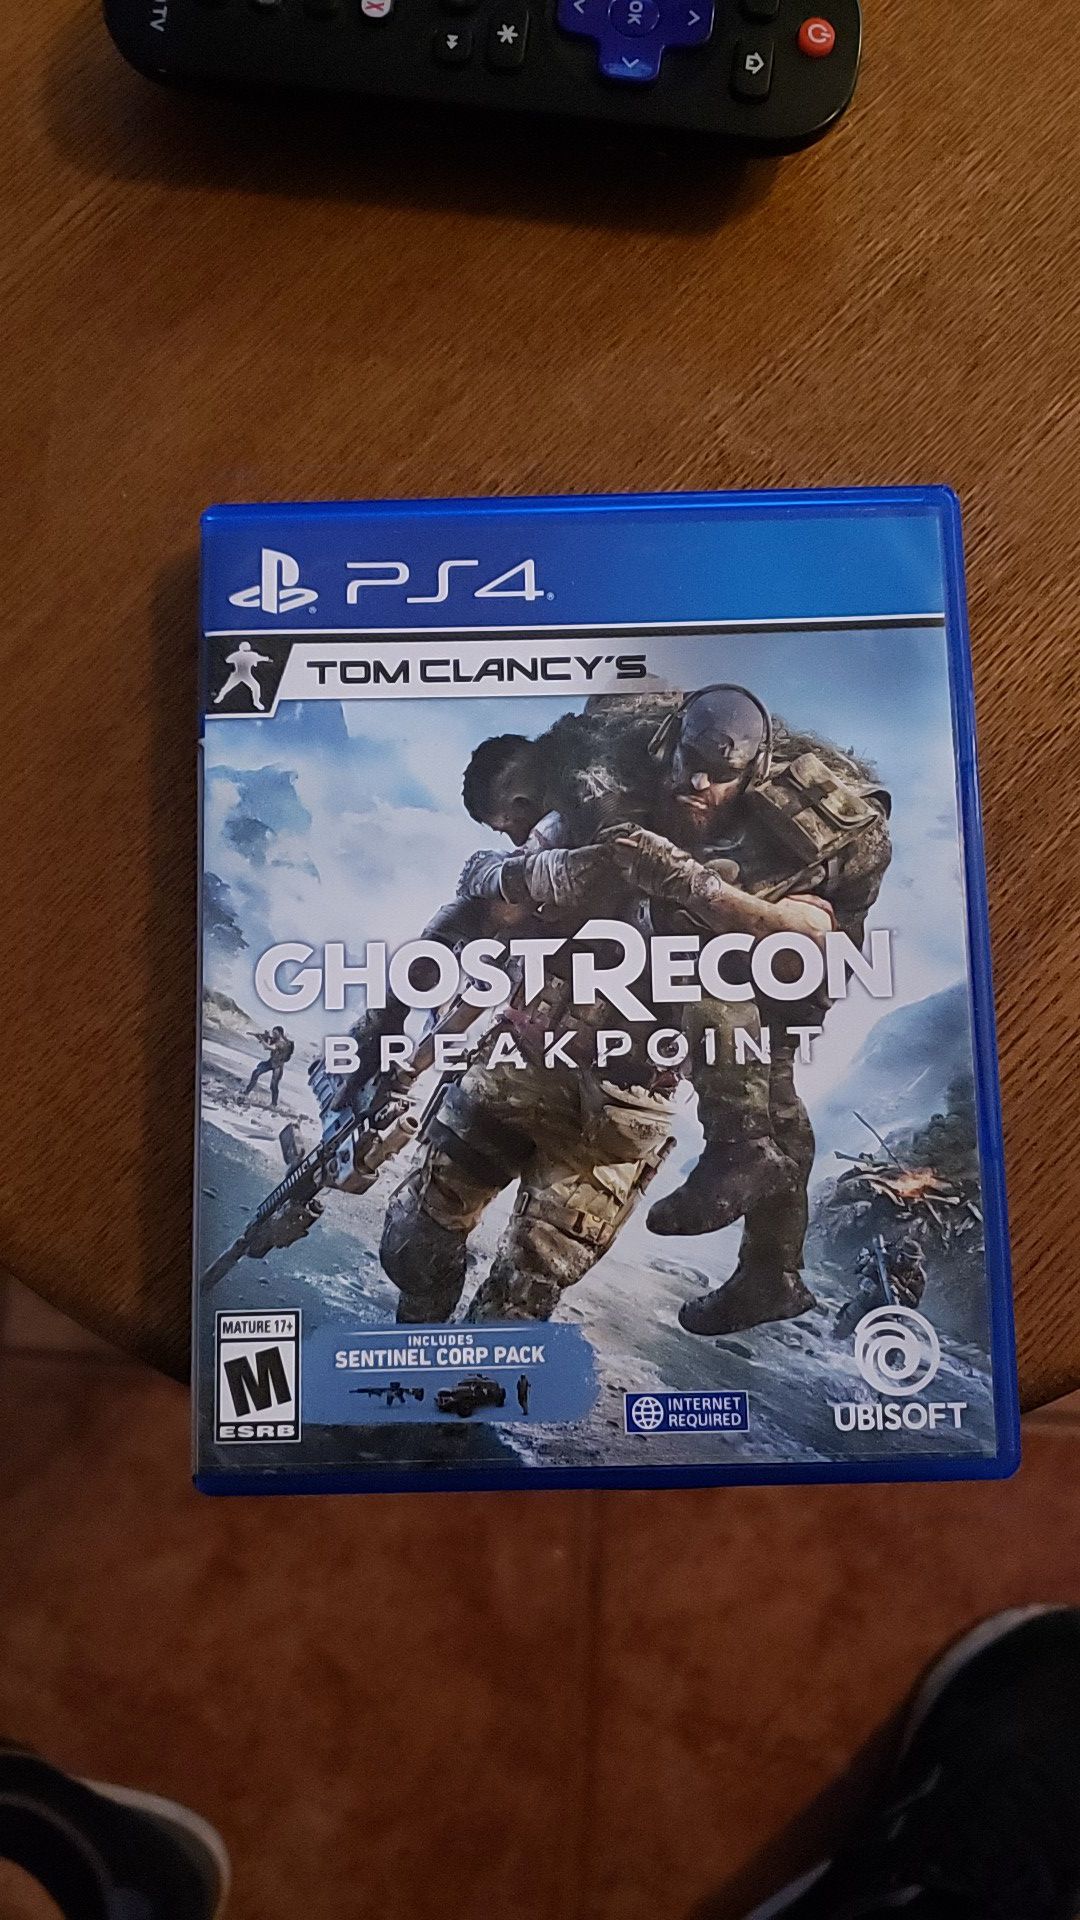 Ghost recon break point for ps4